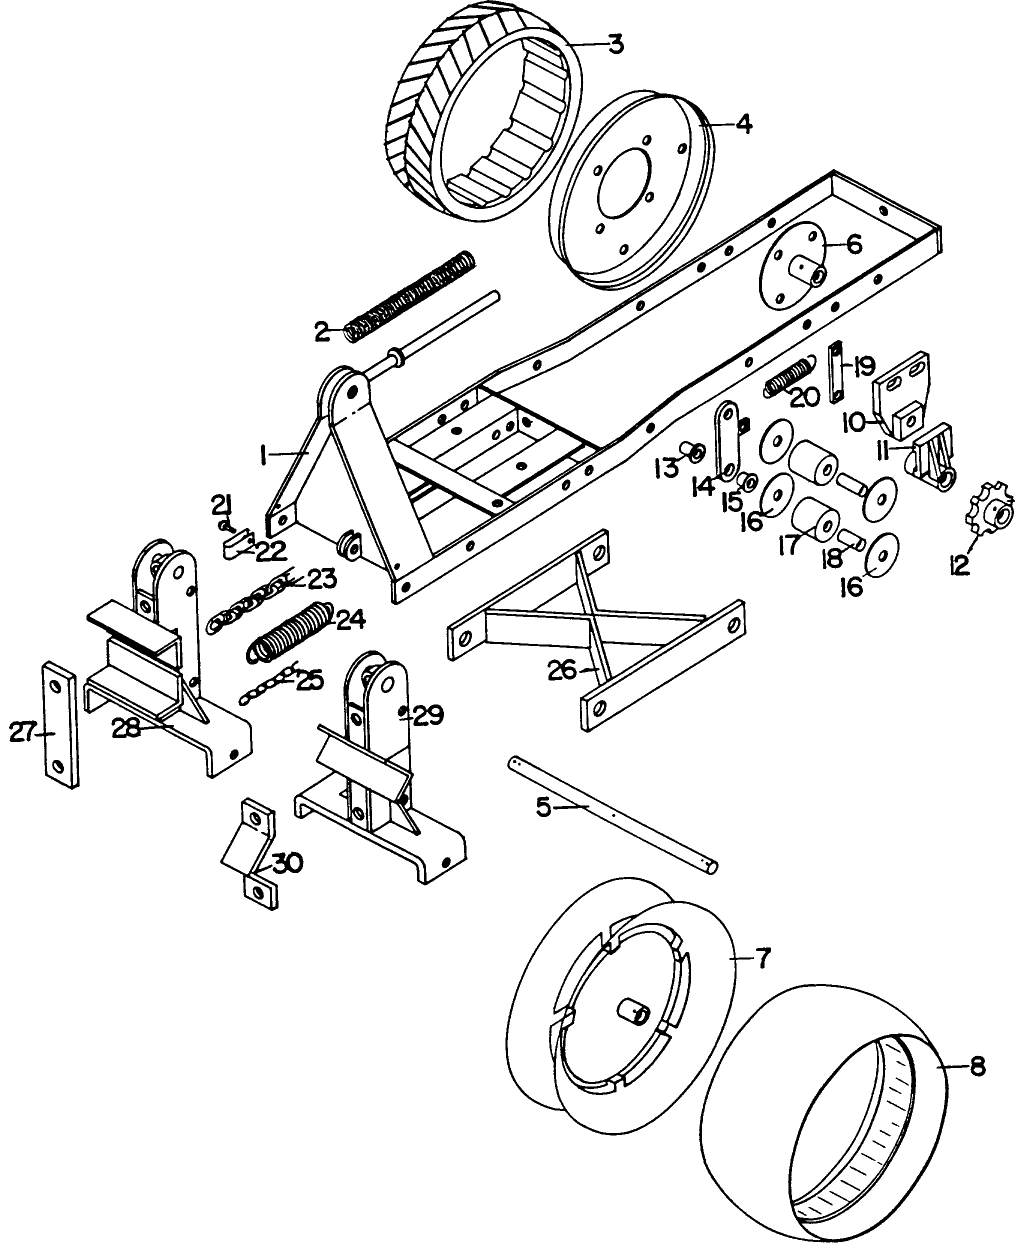 002 FRAME ASSEMBLY & RELATED PARTS, 28 & 29 PLANTERS